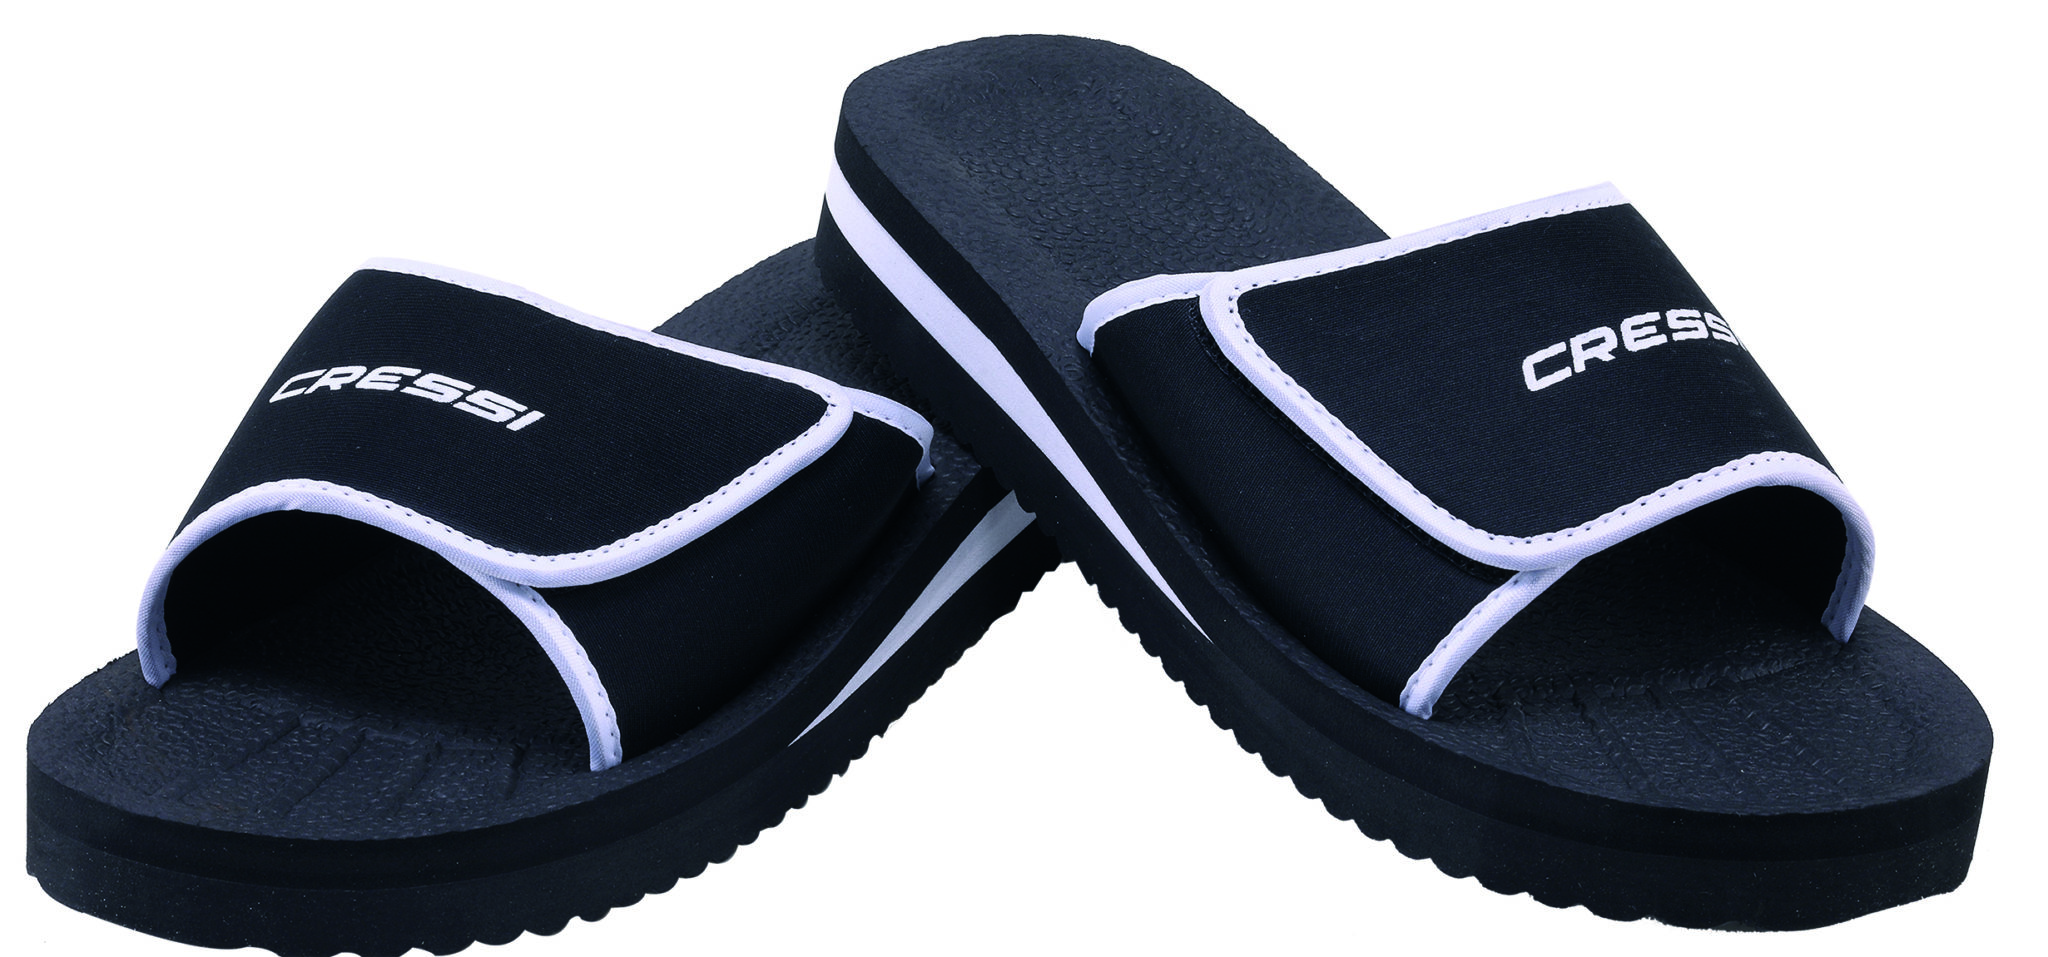 Cressi Unisex Beach Flip Flop for Beach and Pool 